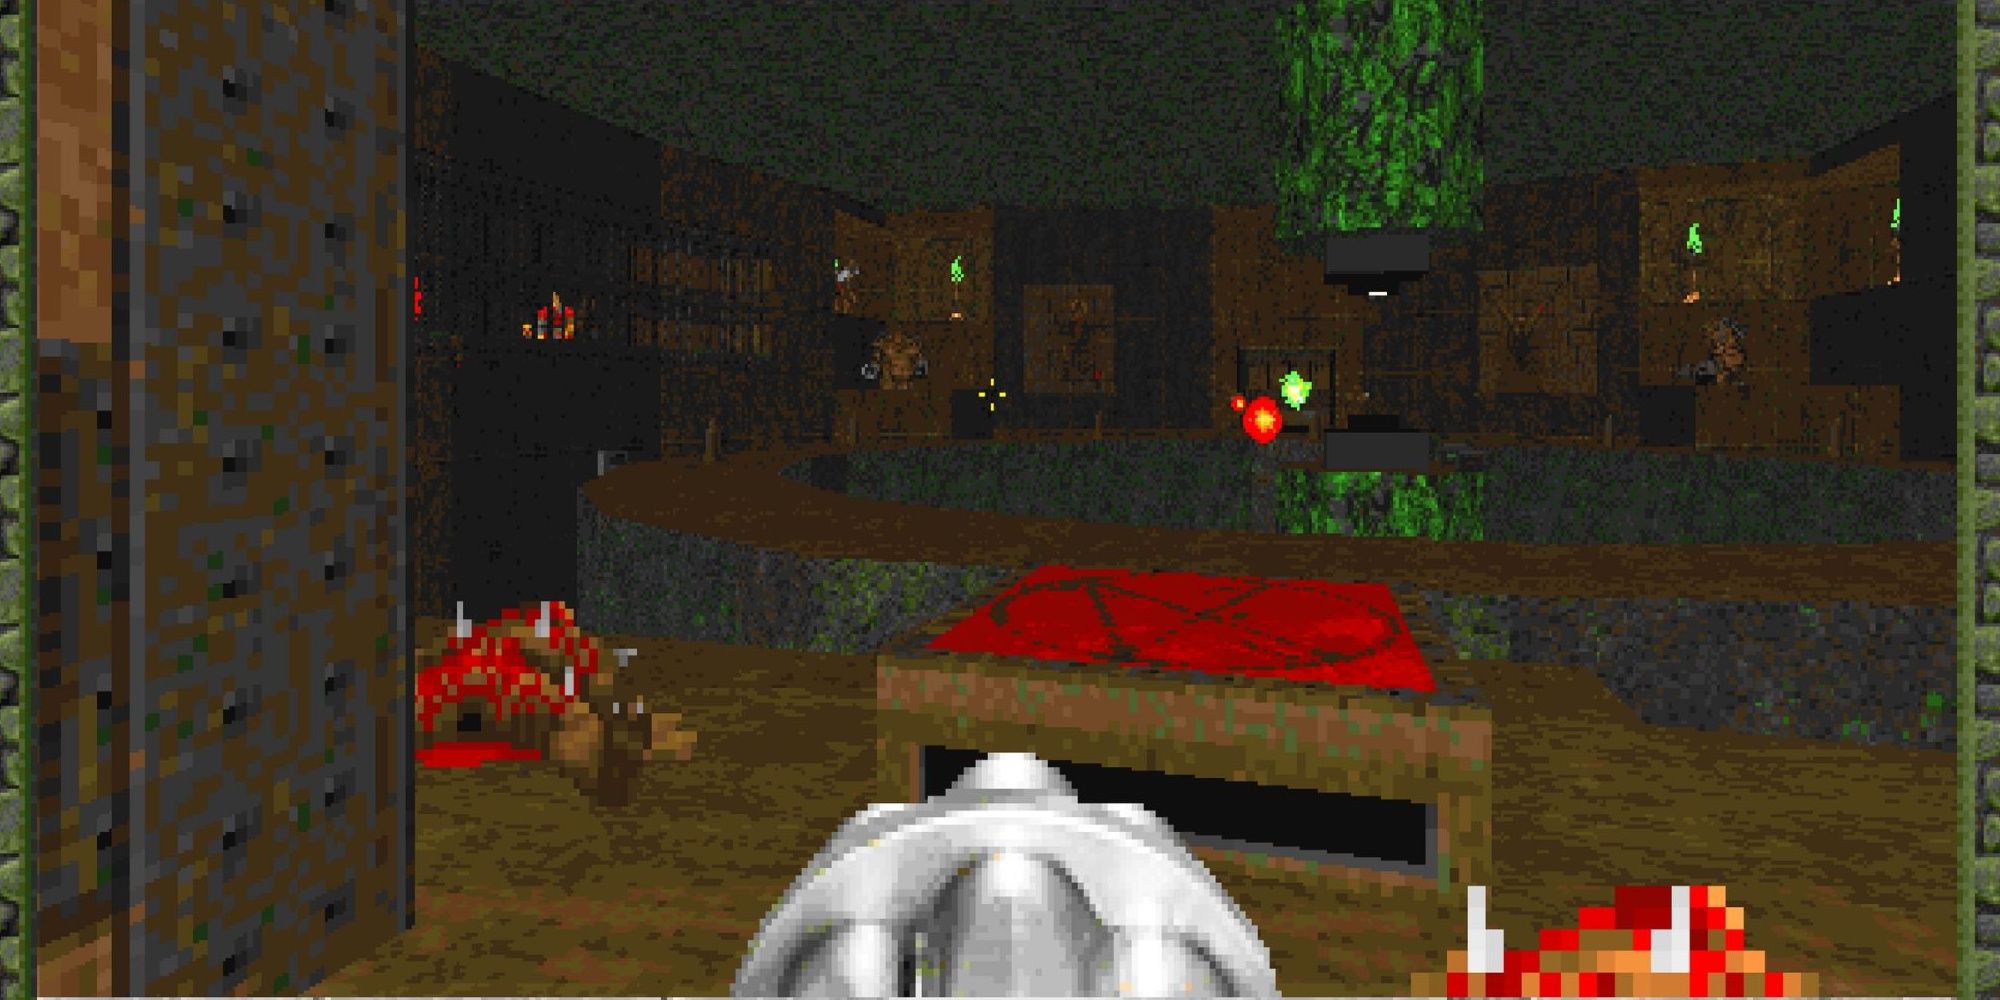 The deadly final arena in Abattoire from Final Doom The Plutonia Experiment.